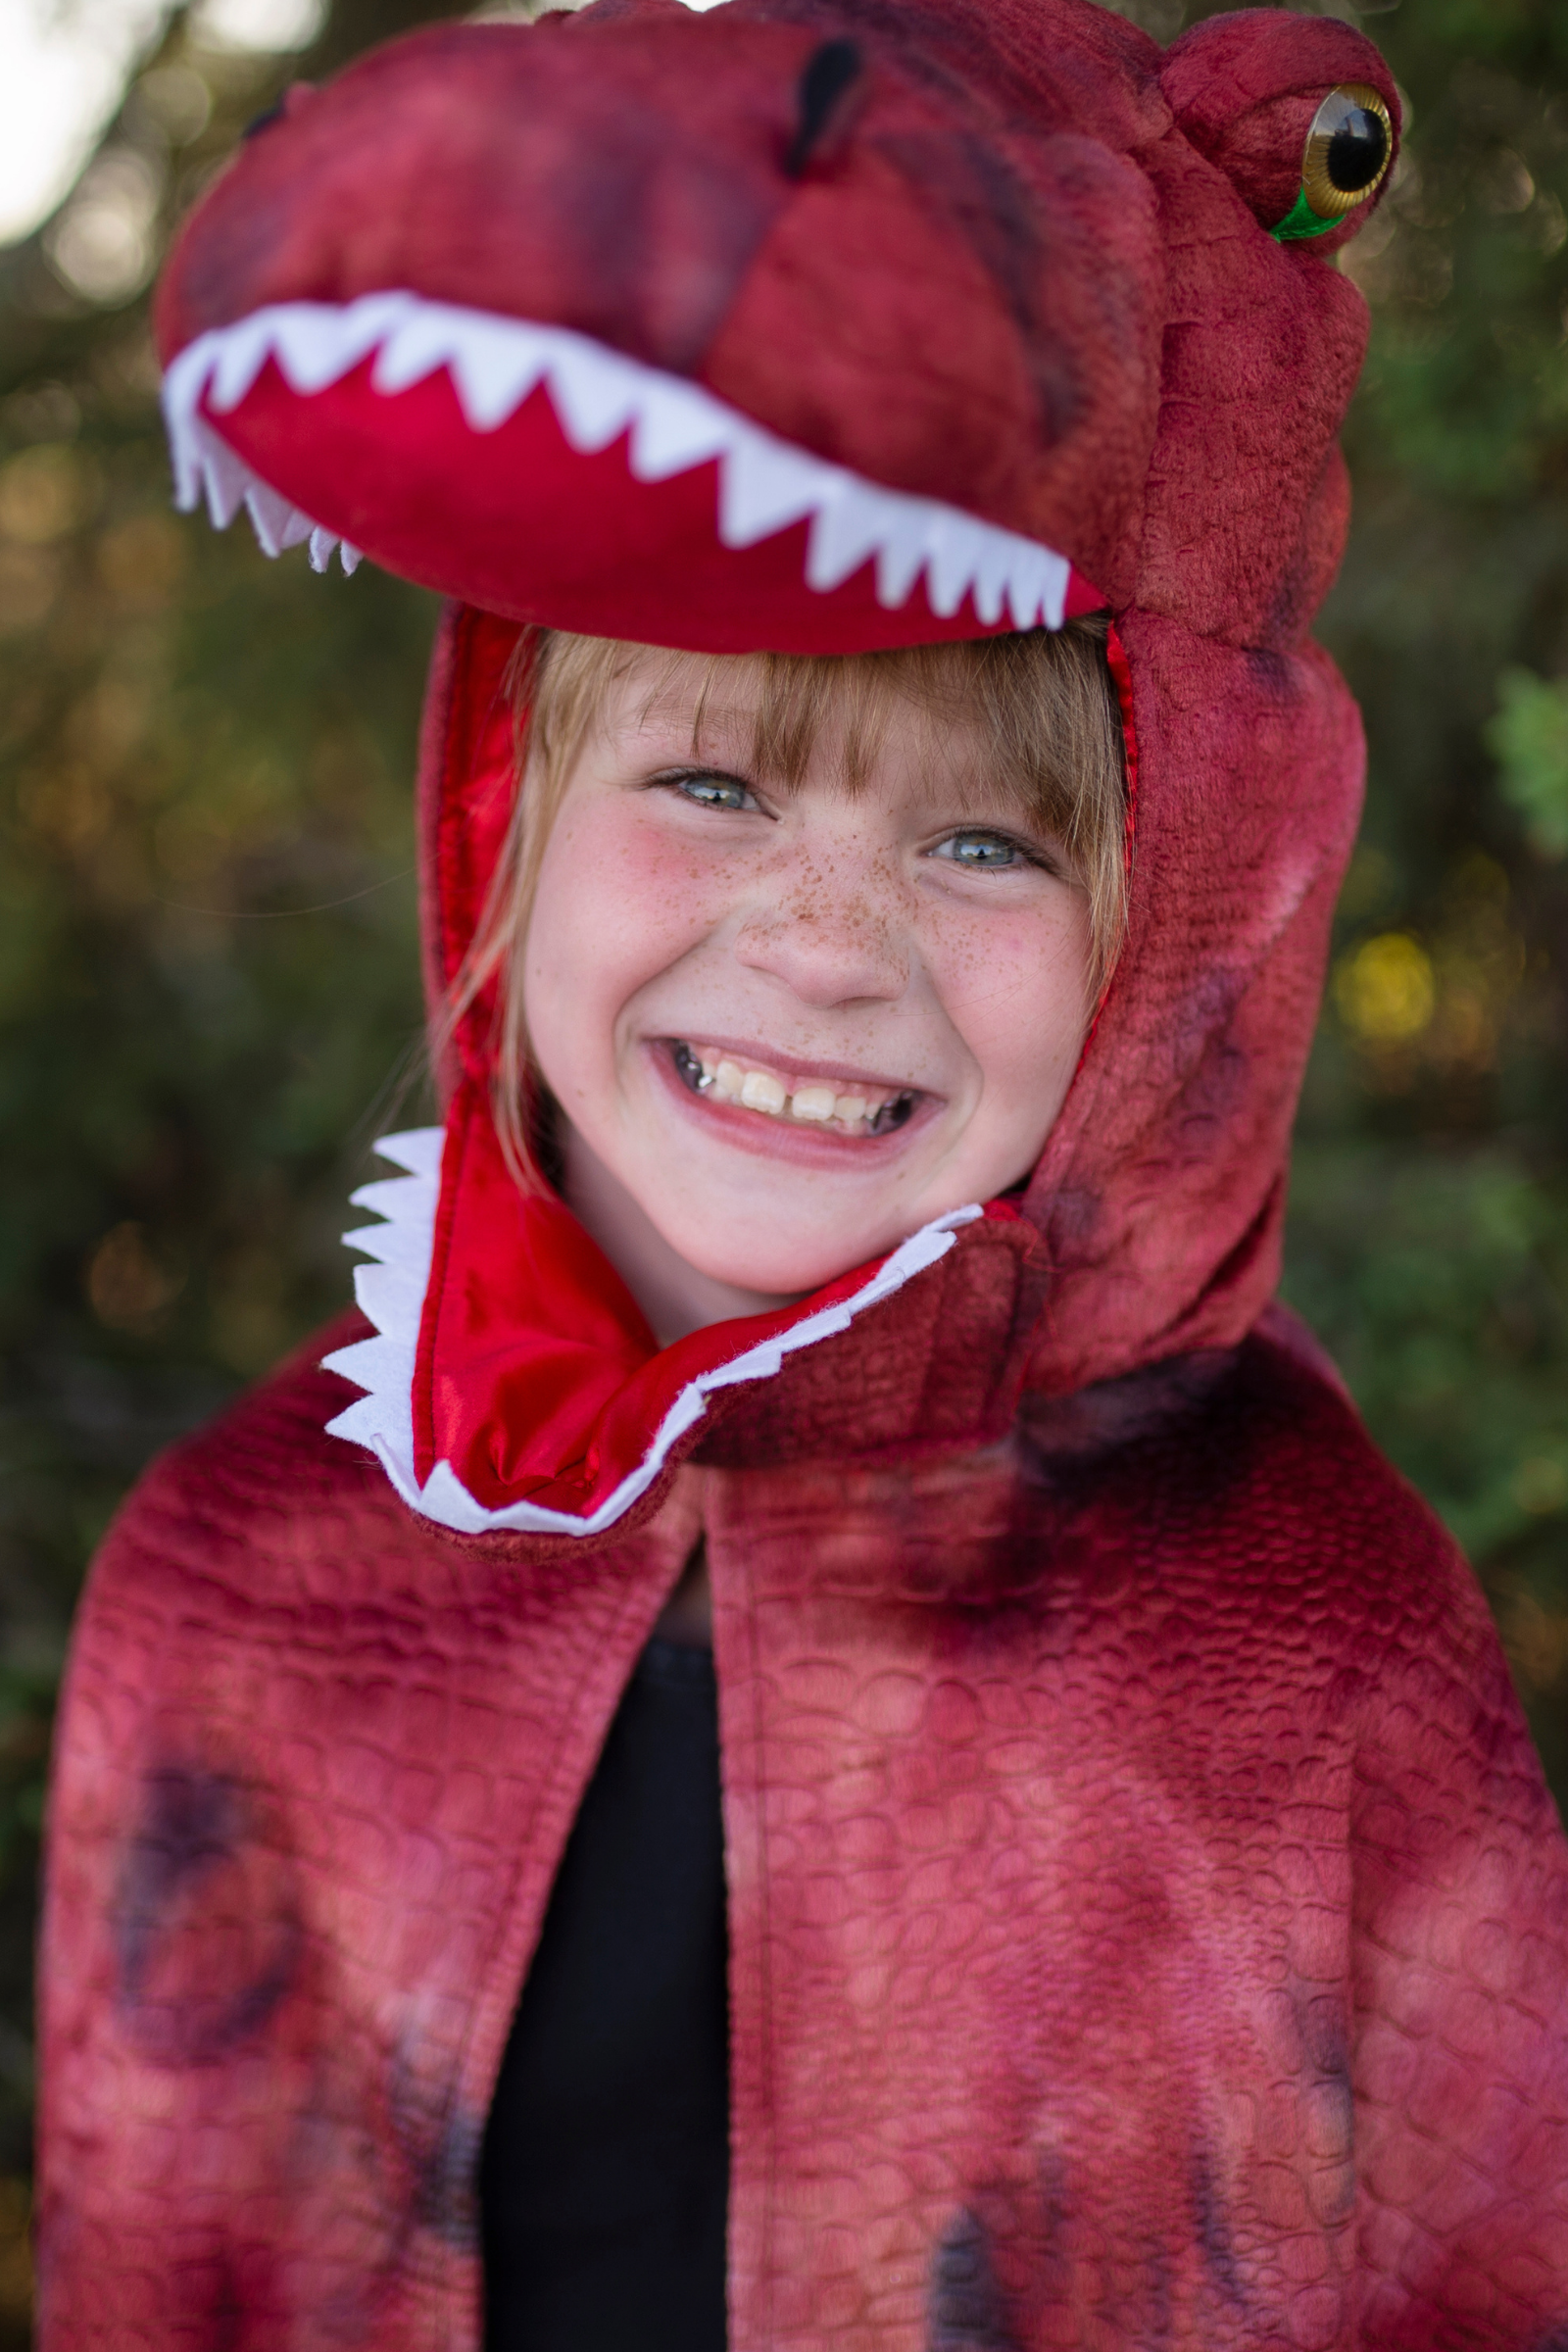 Red & Black Grandasaurus T-Rex Cape with Claws